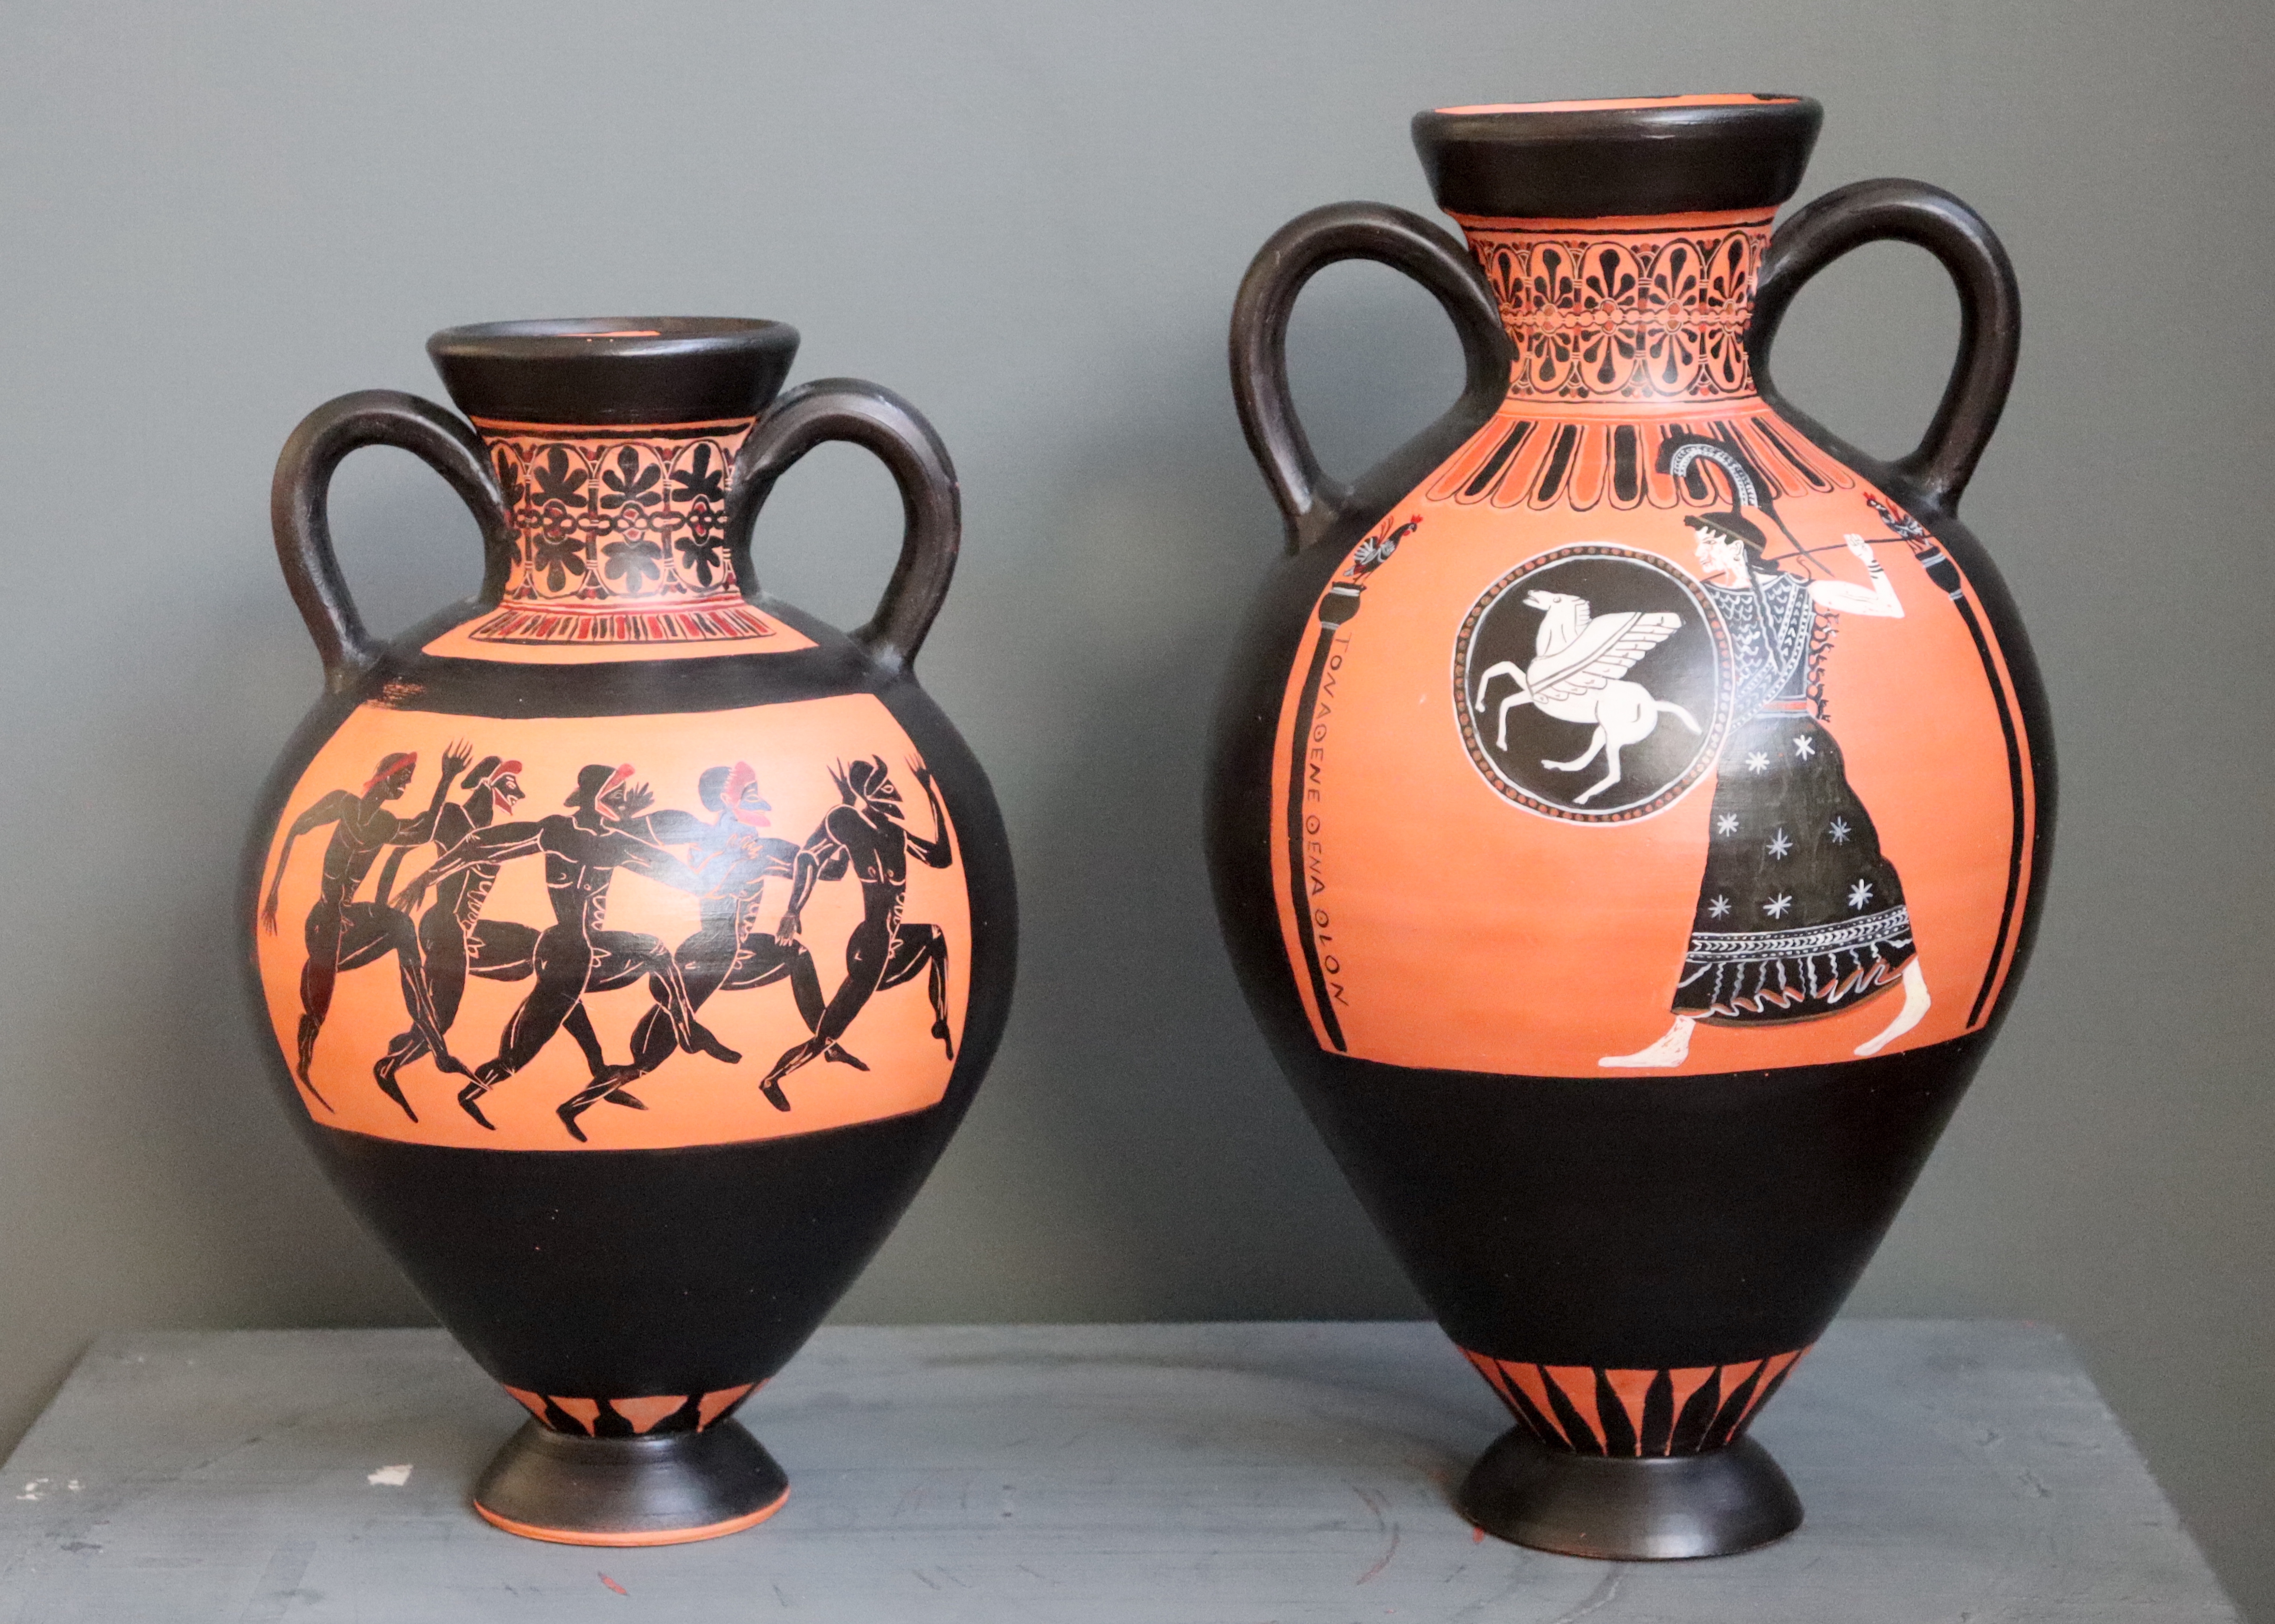 Two replica Panathenaic vases, one with Athena and one with a running race